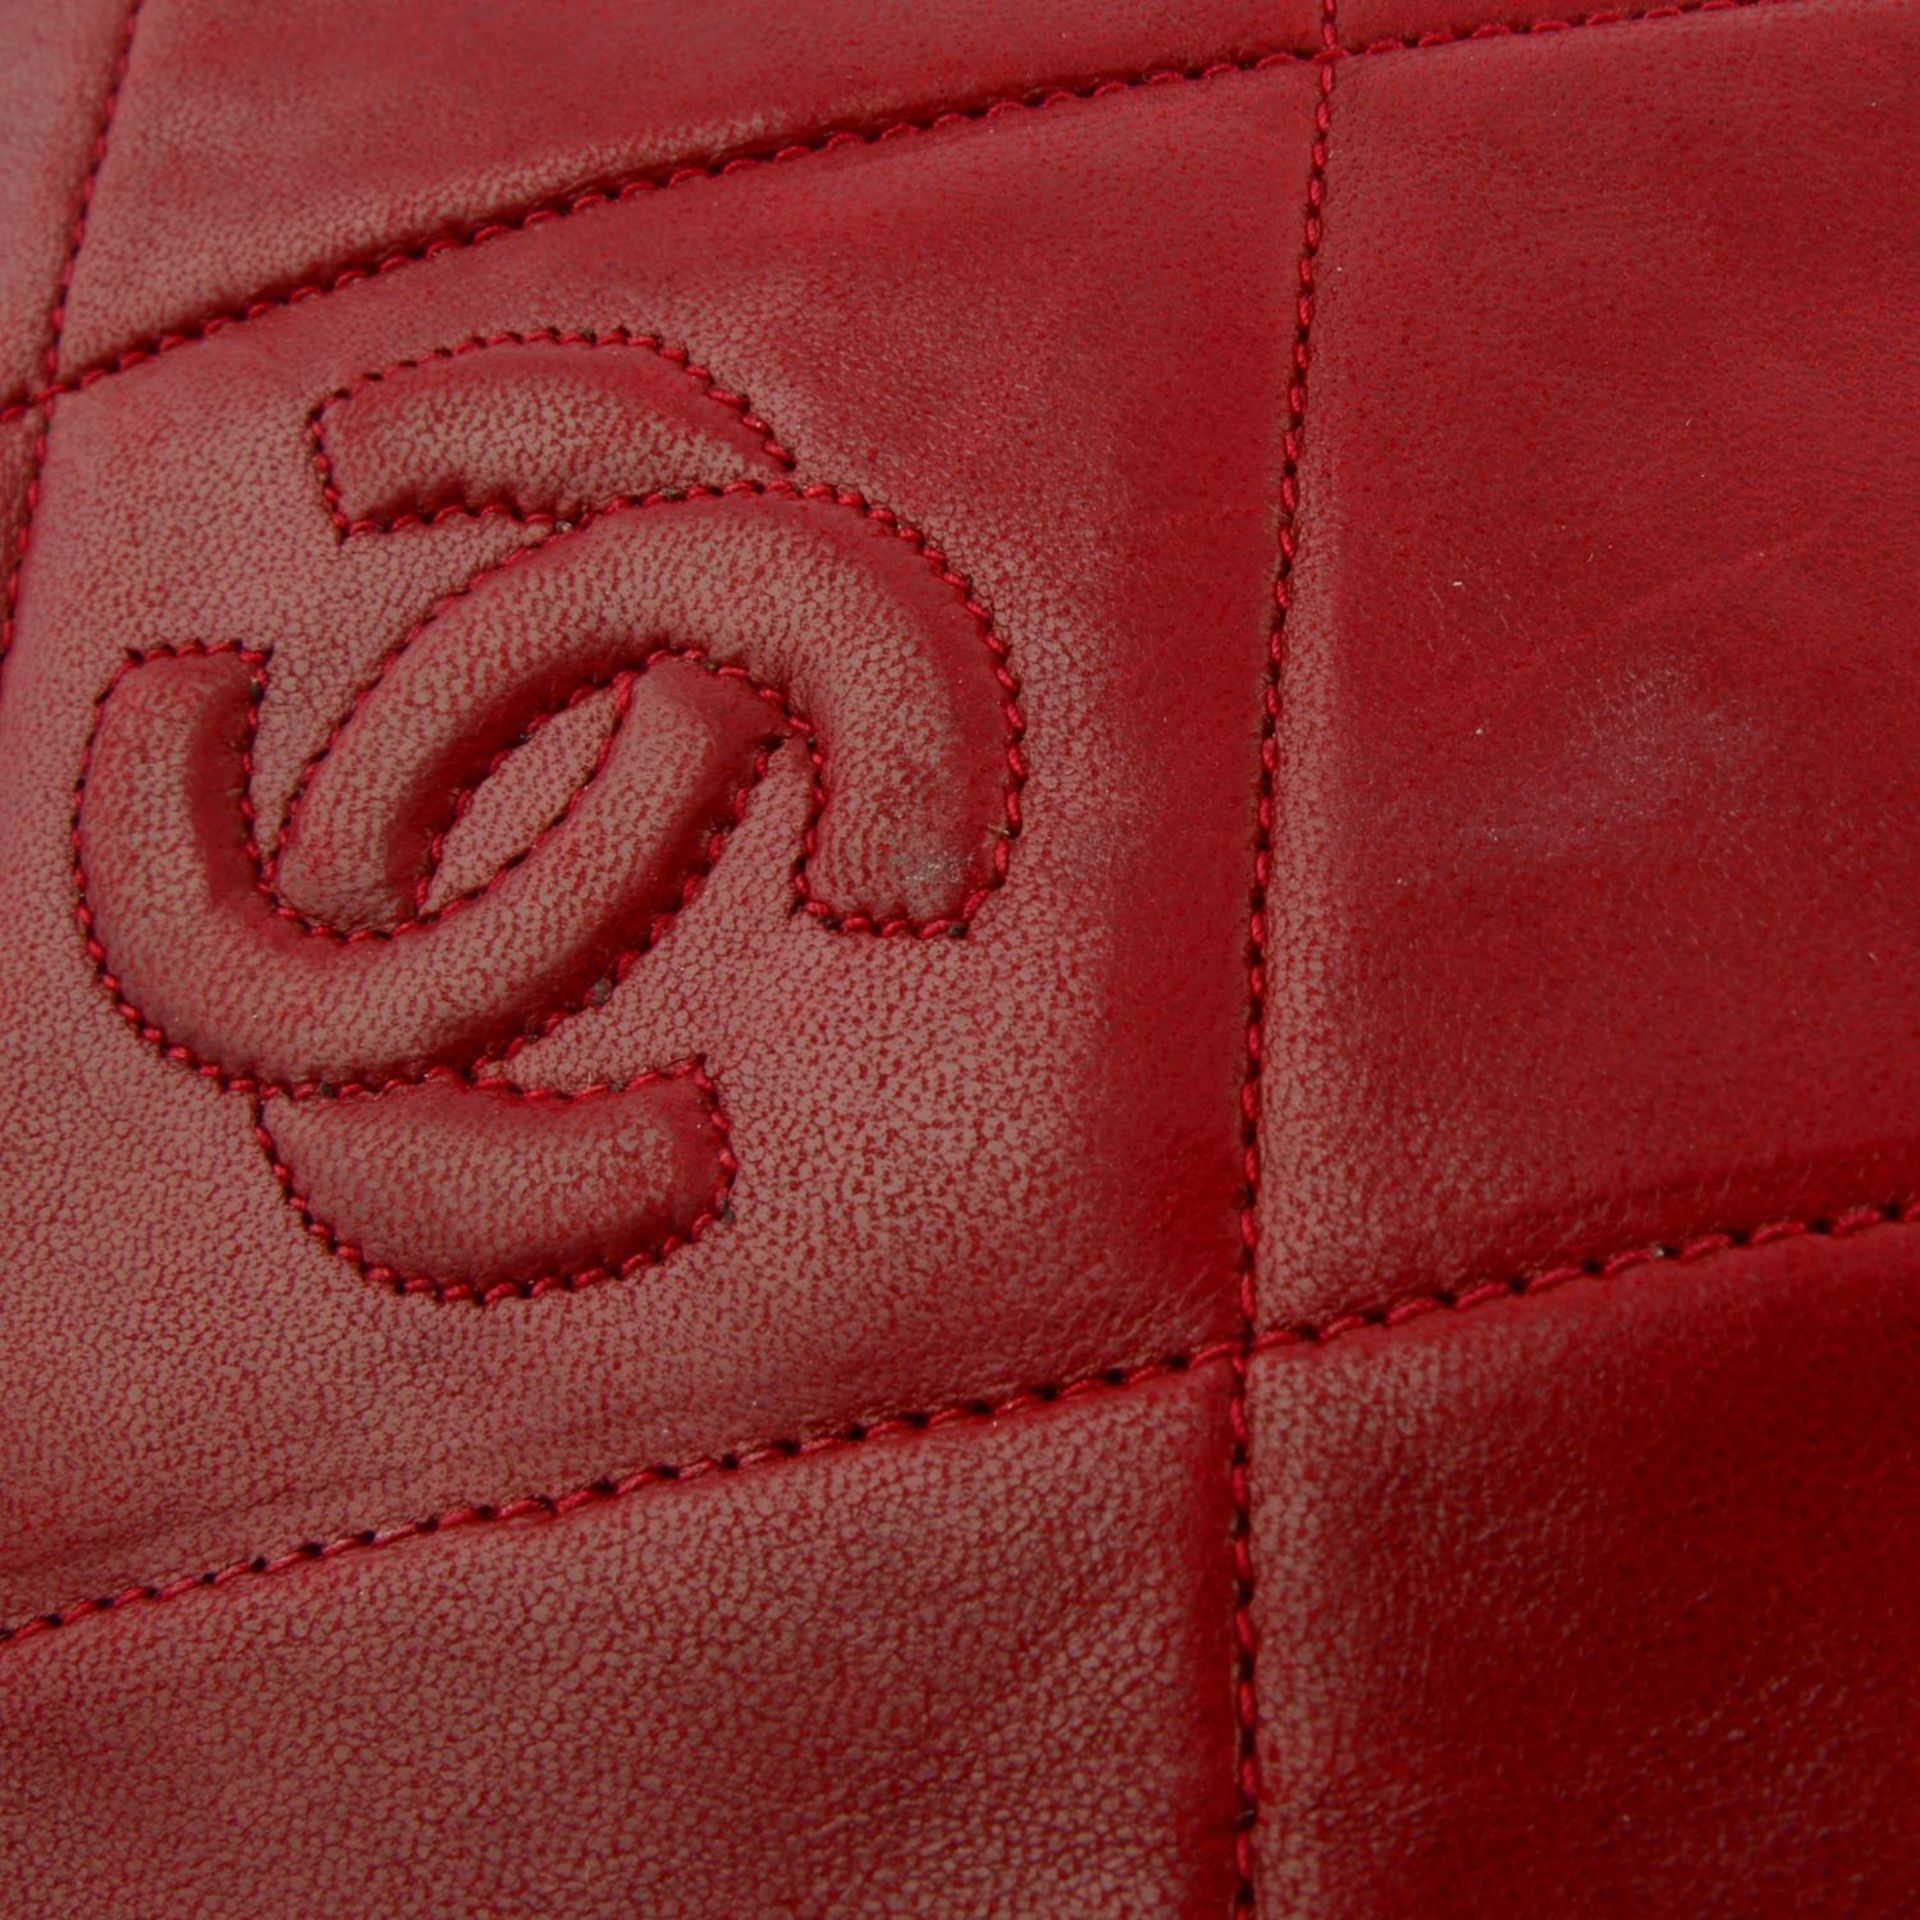 CHANEL - a red leather flap crossbody handbag. - Image 6 of 6